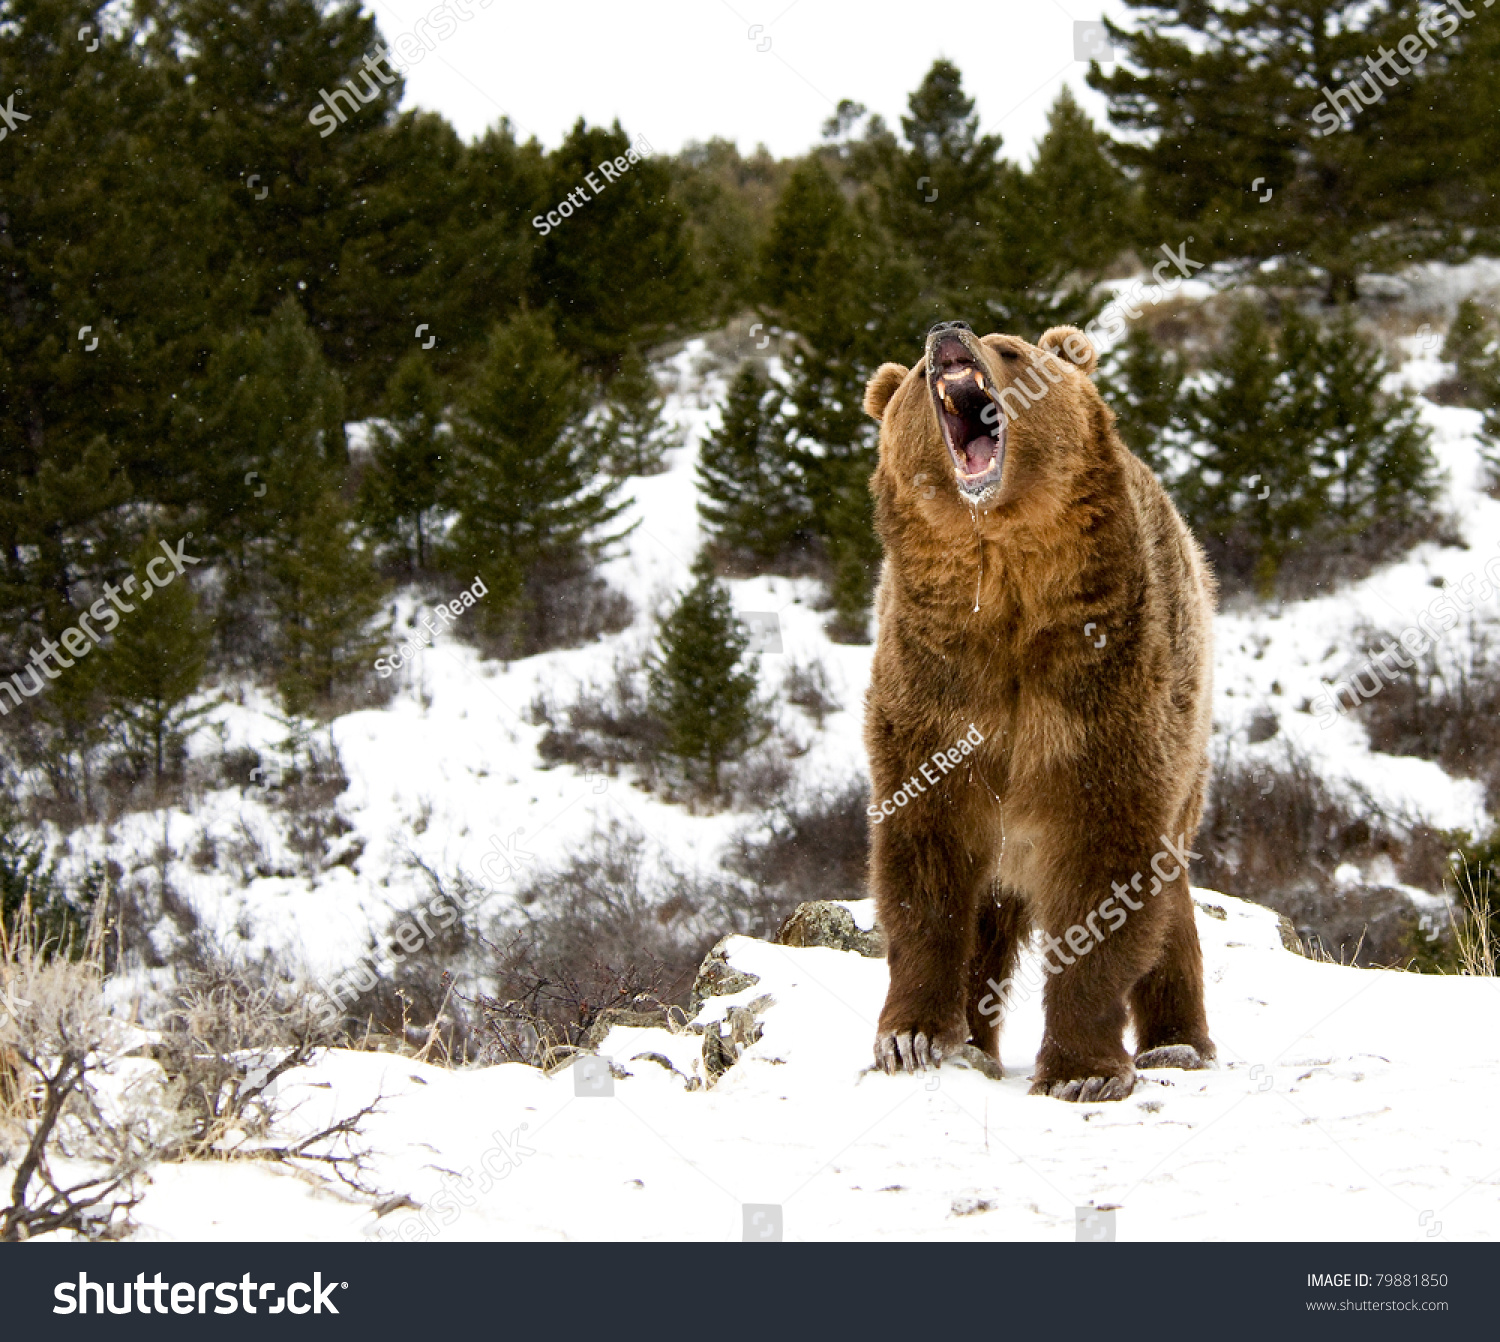 Roaring Grizzly On Winter Hill Stock Photo (Download Now) 79881850 ...